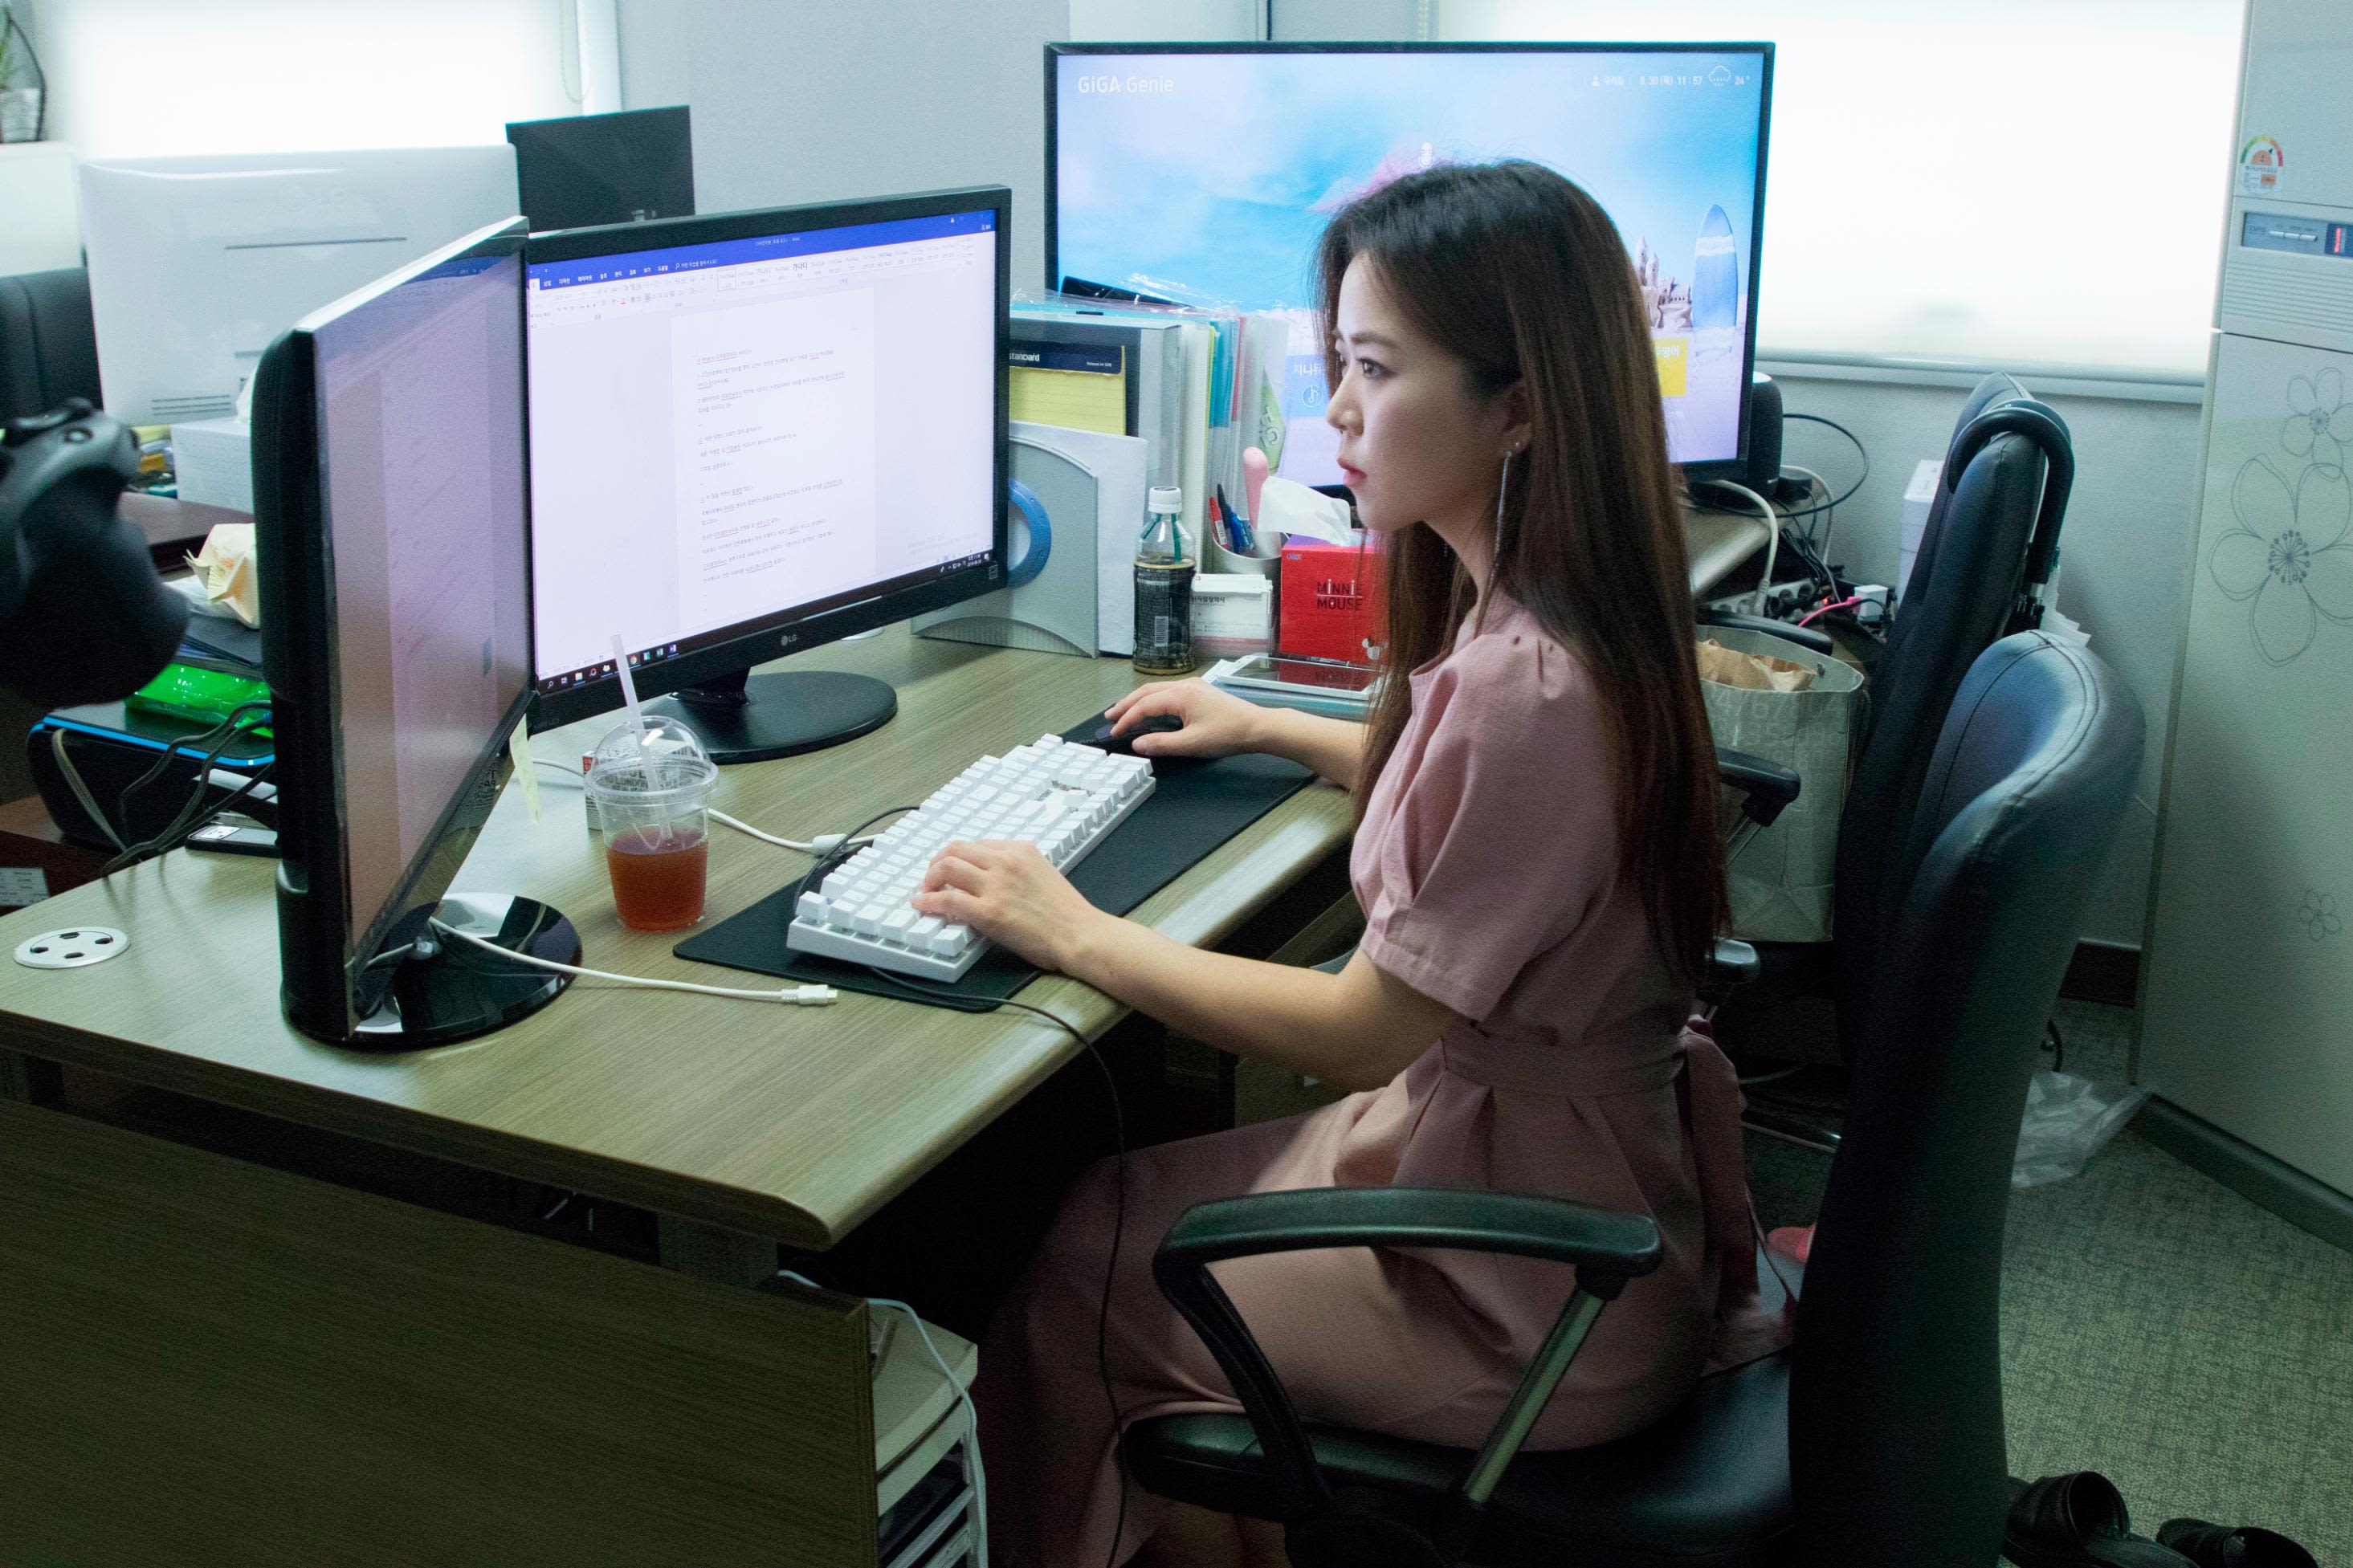 Upskirt crisis: Spy cams and secret filming abound in South Korea as police  promise crackdown | CNN